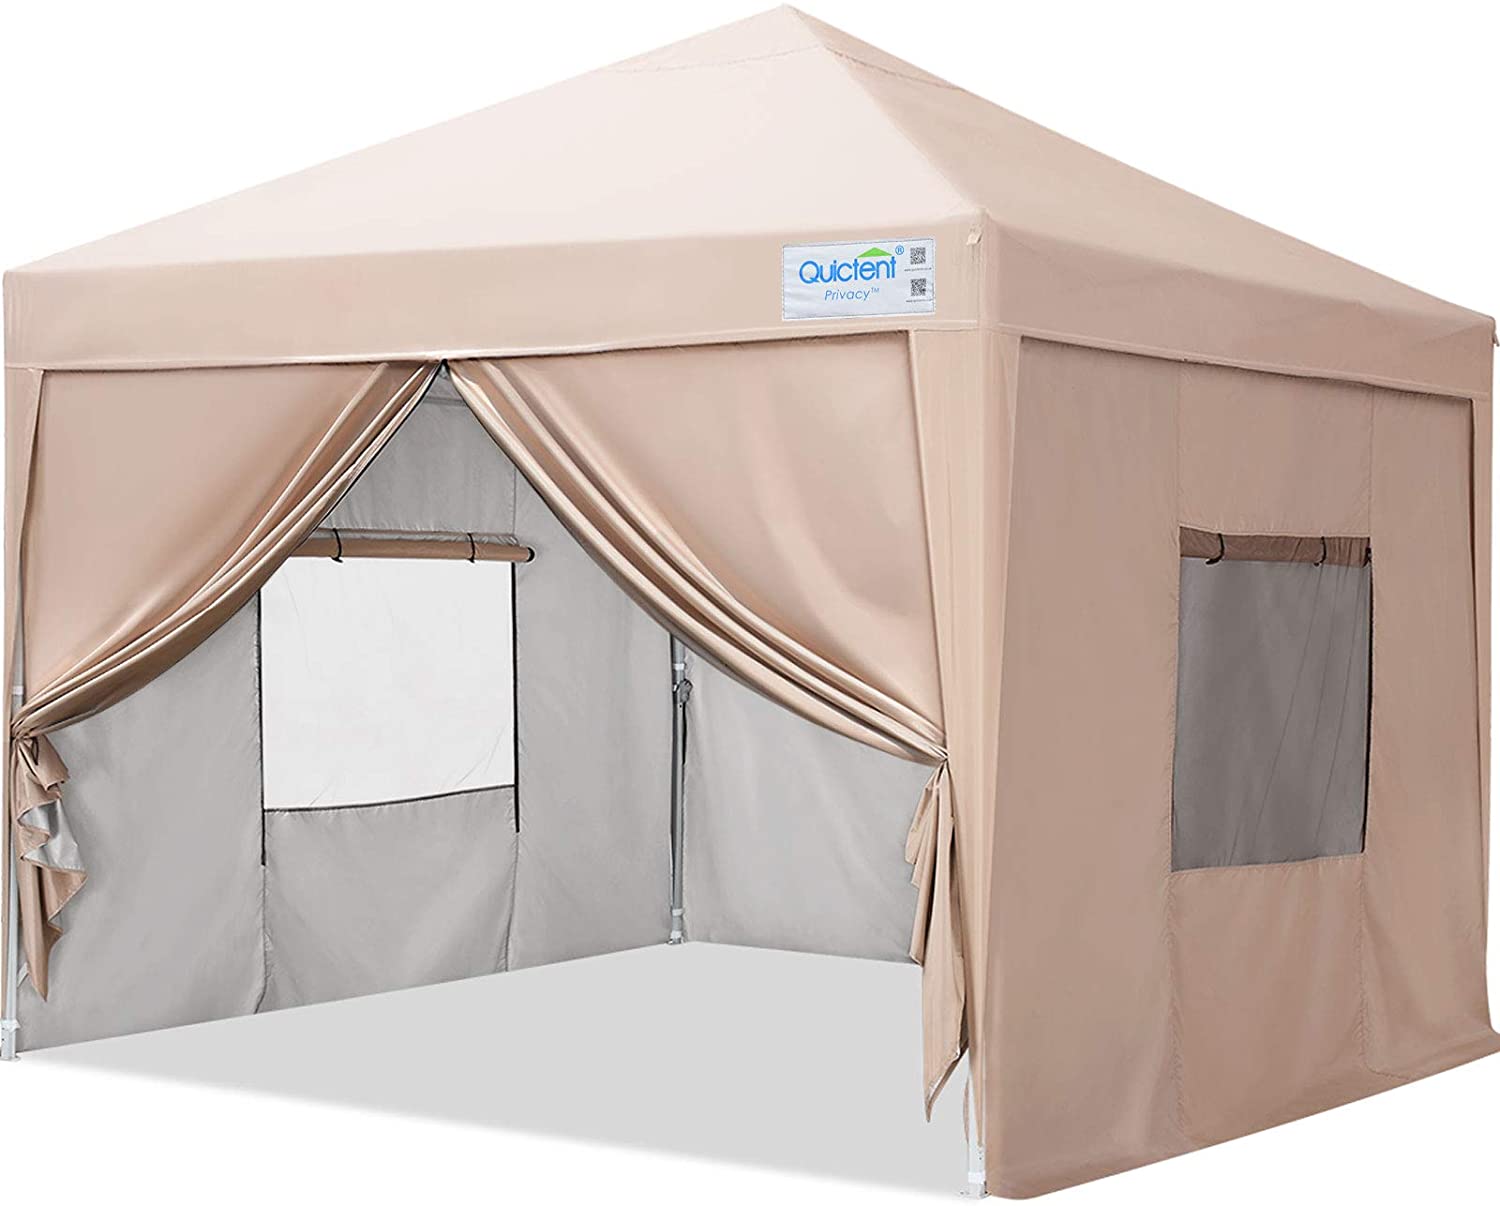 Quictent Privacy Pop-Up Canopy Tent With Sidewalls